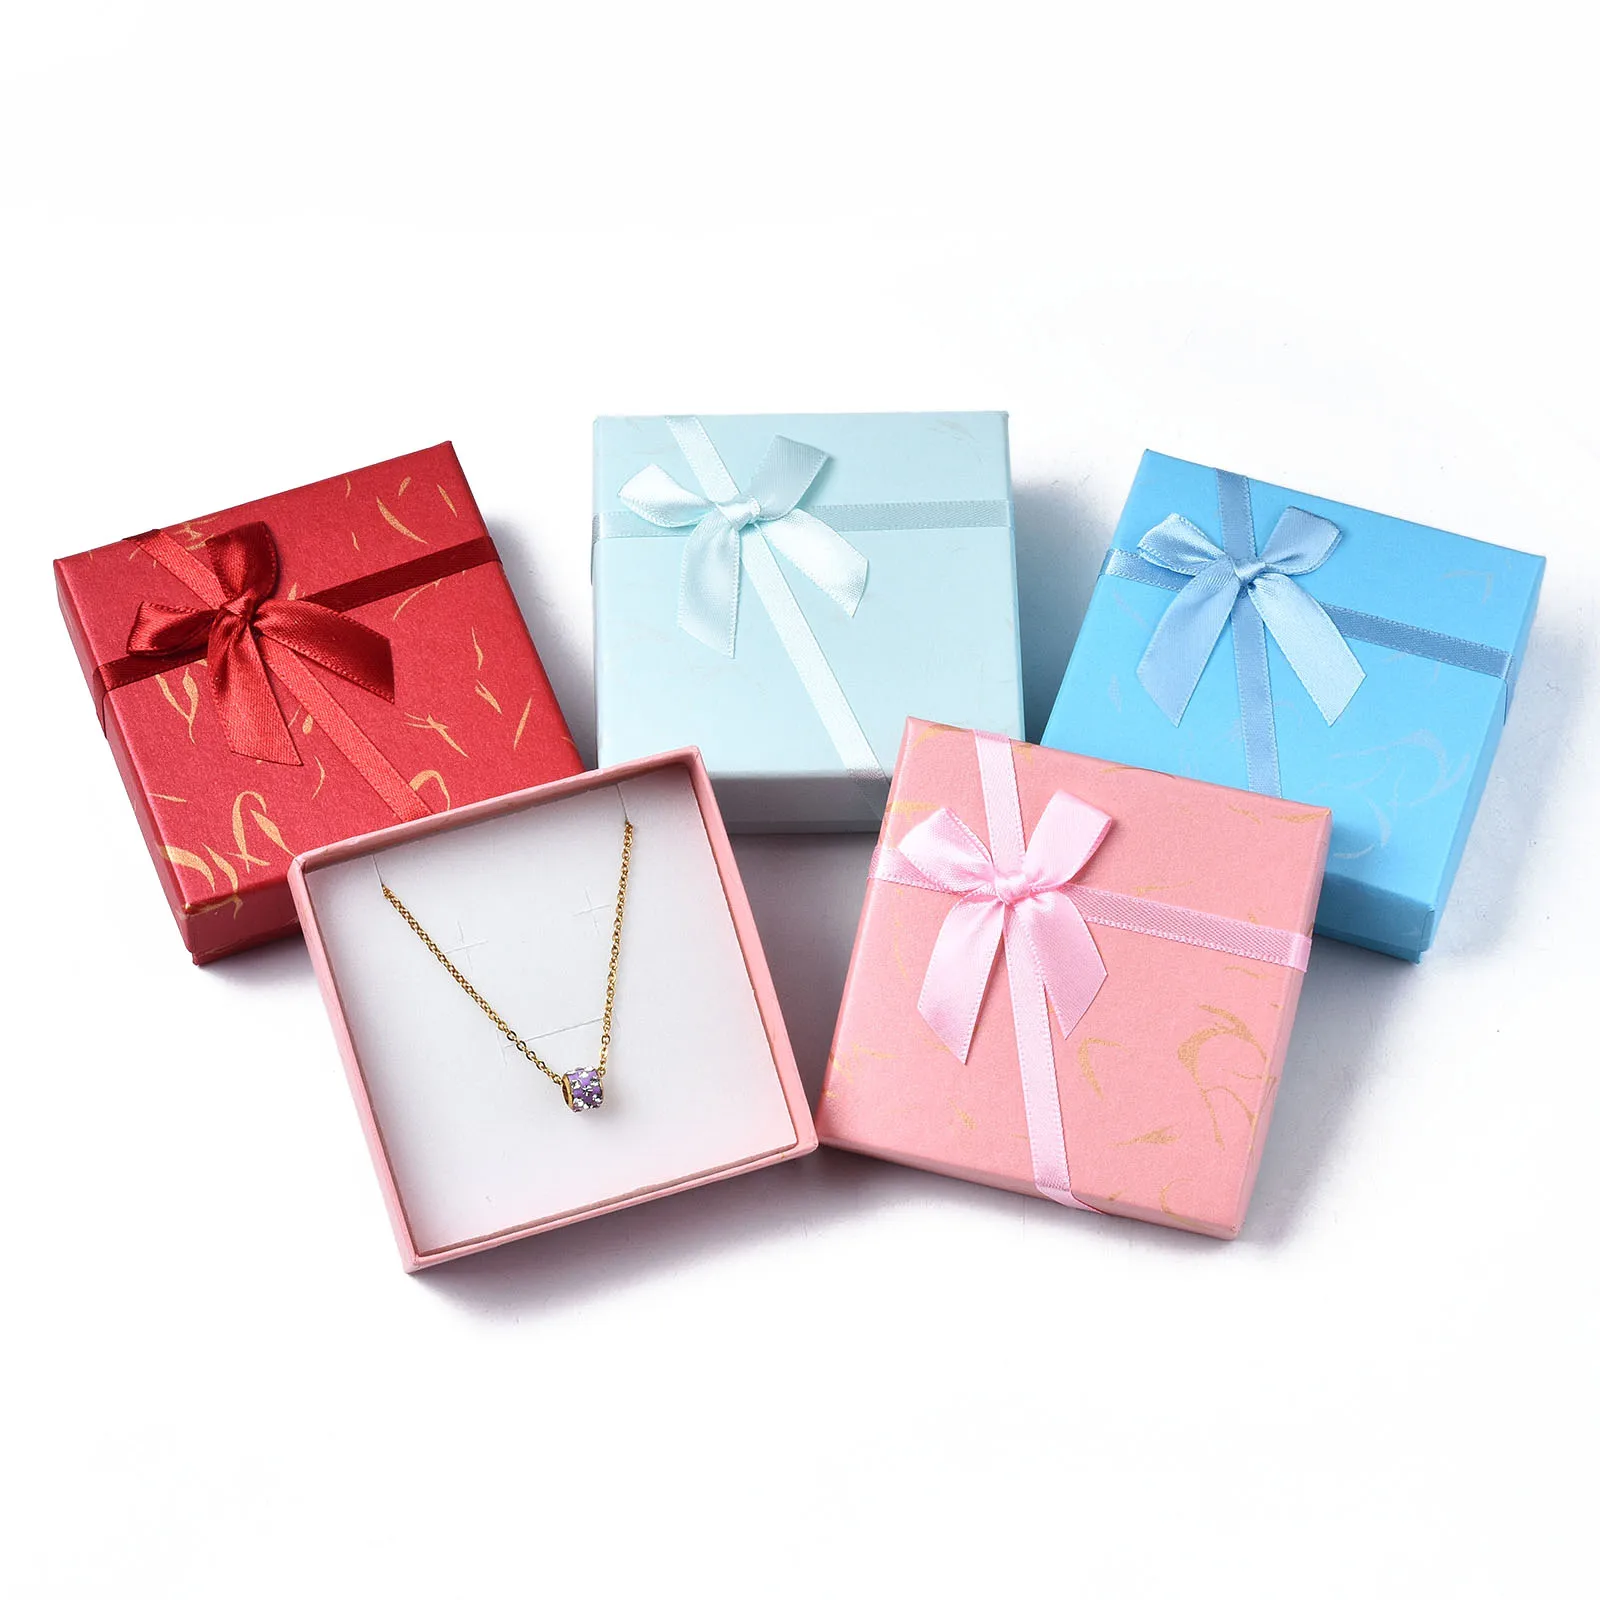 12pcs Square Jewelry Set Cardboard Box Mixed Color with Bowknot Gift Box For Necklaces Earrings Rings DIY Packaging 9x9x3cm 24pc set mixed color cardboard boxes jewelry rings storage carrying display box cases with sponge inside bowknot square 5 5 4mm